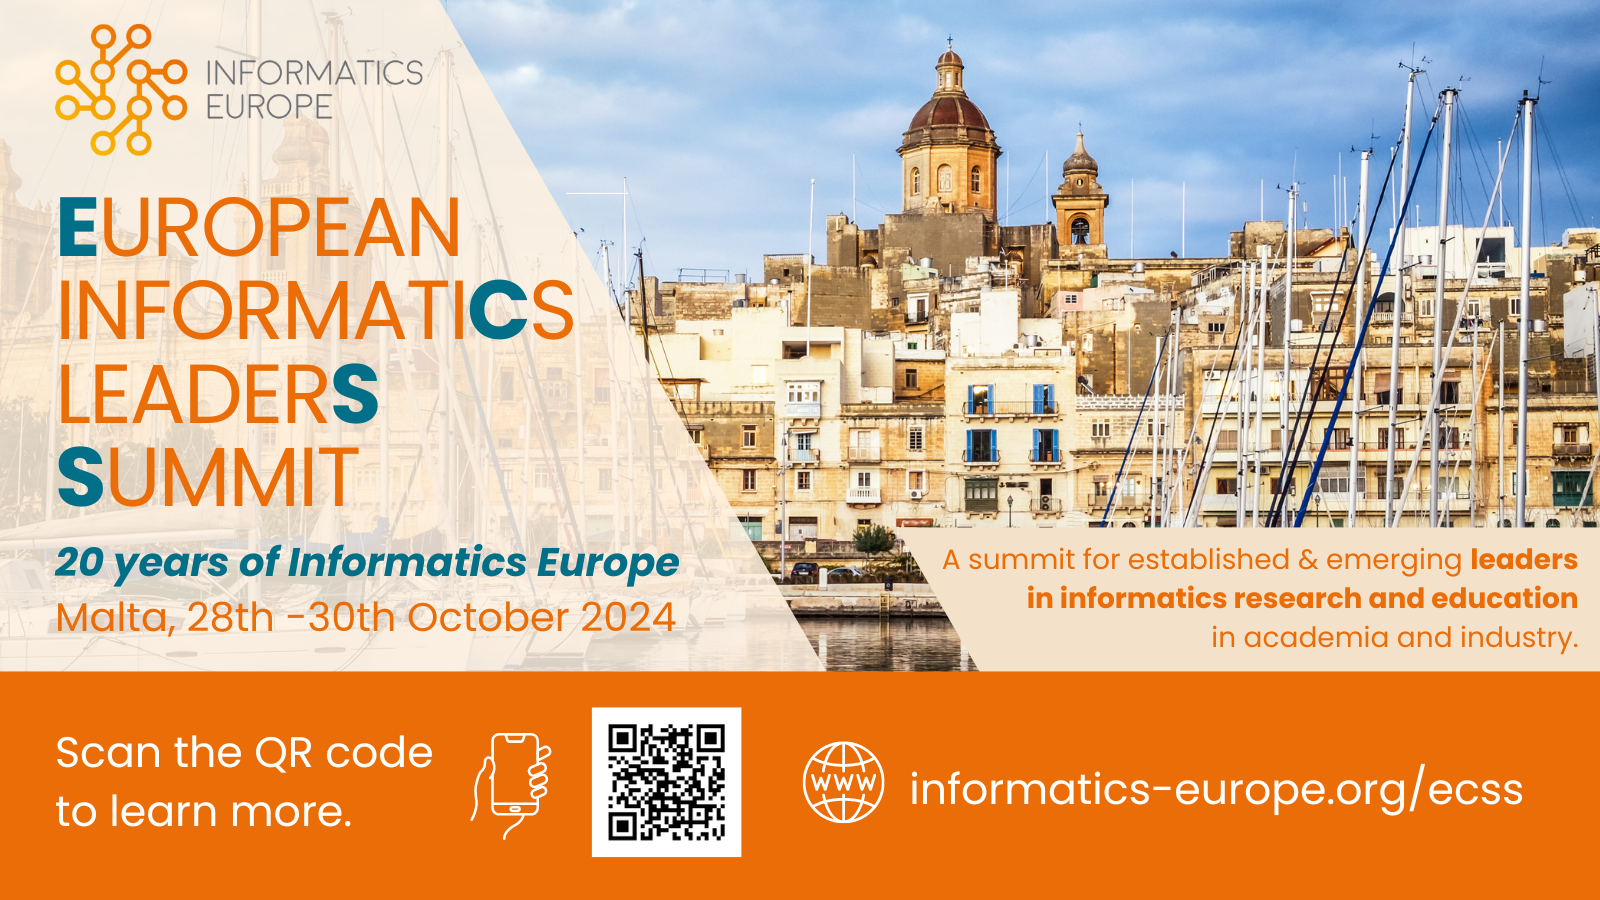 Save the date: ECSS 2024 in Malta - 20 years of Informatics Europe